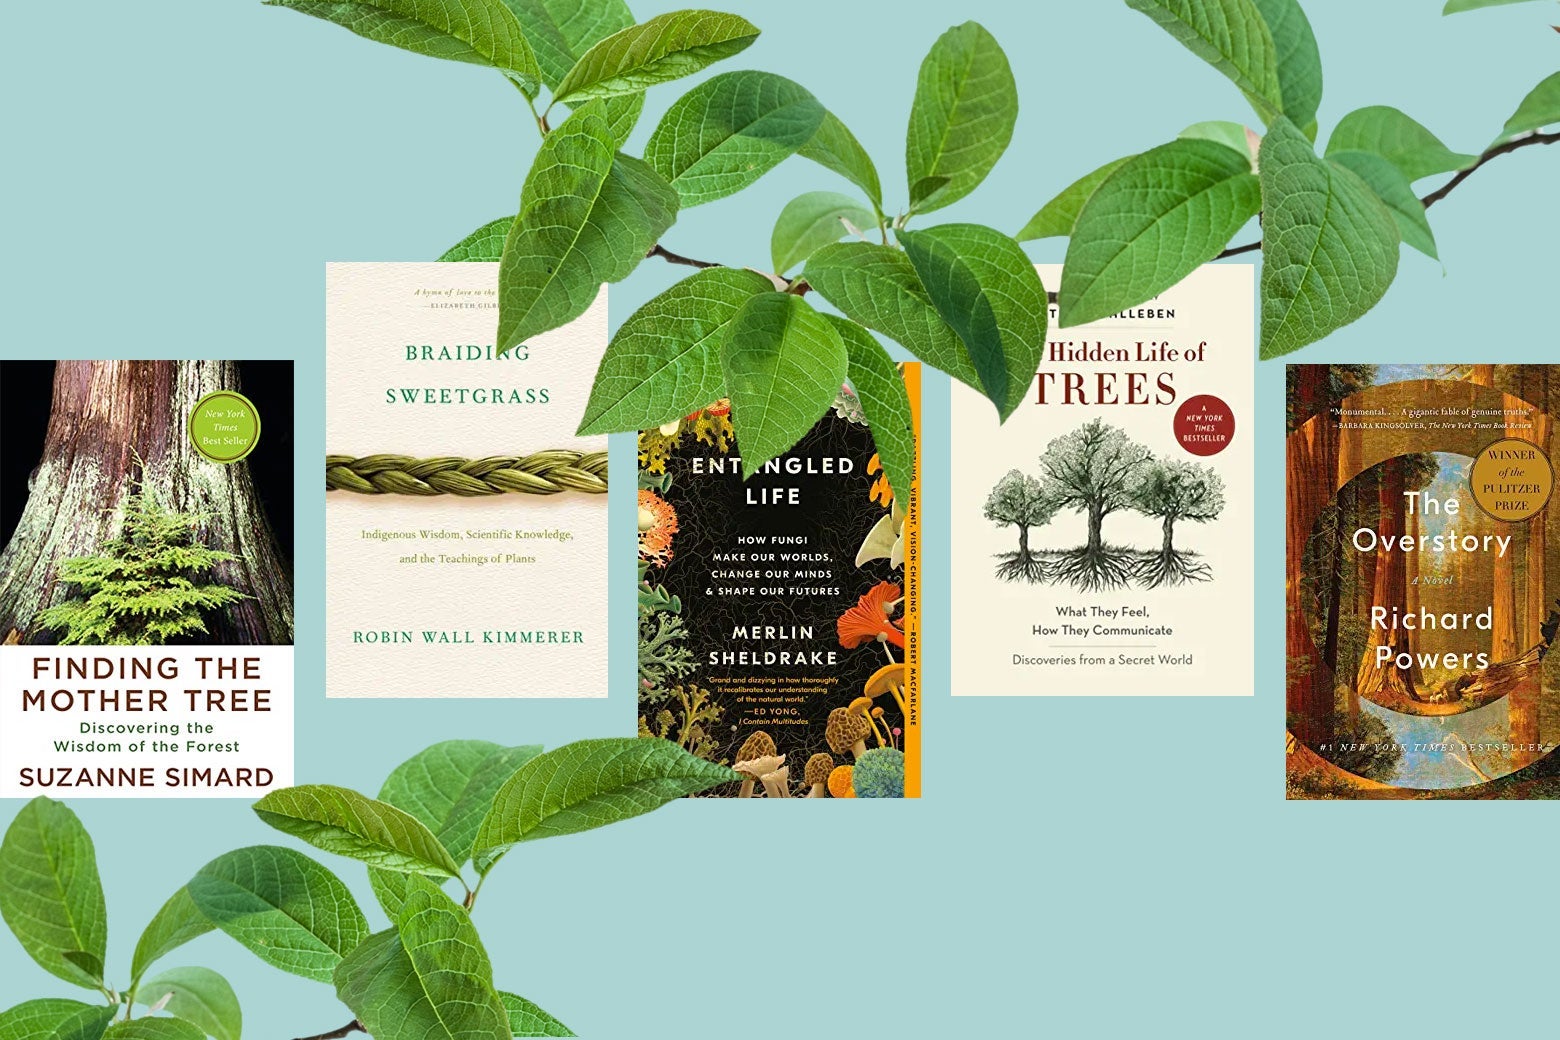 A collage of the covers of a number of books mentioned in this article as well as green leaves.